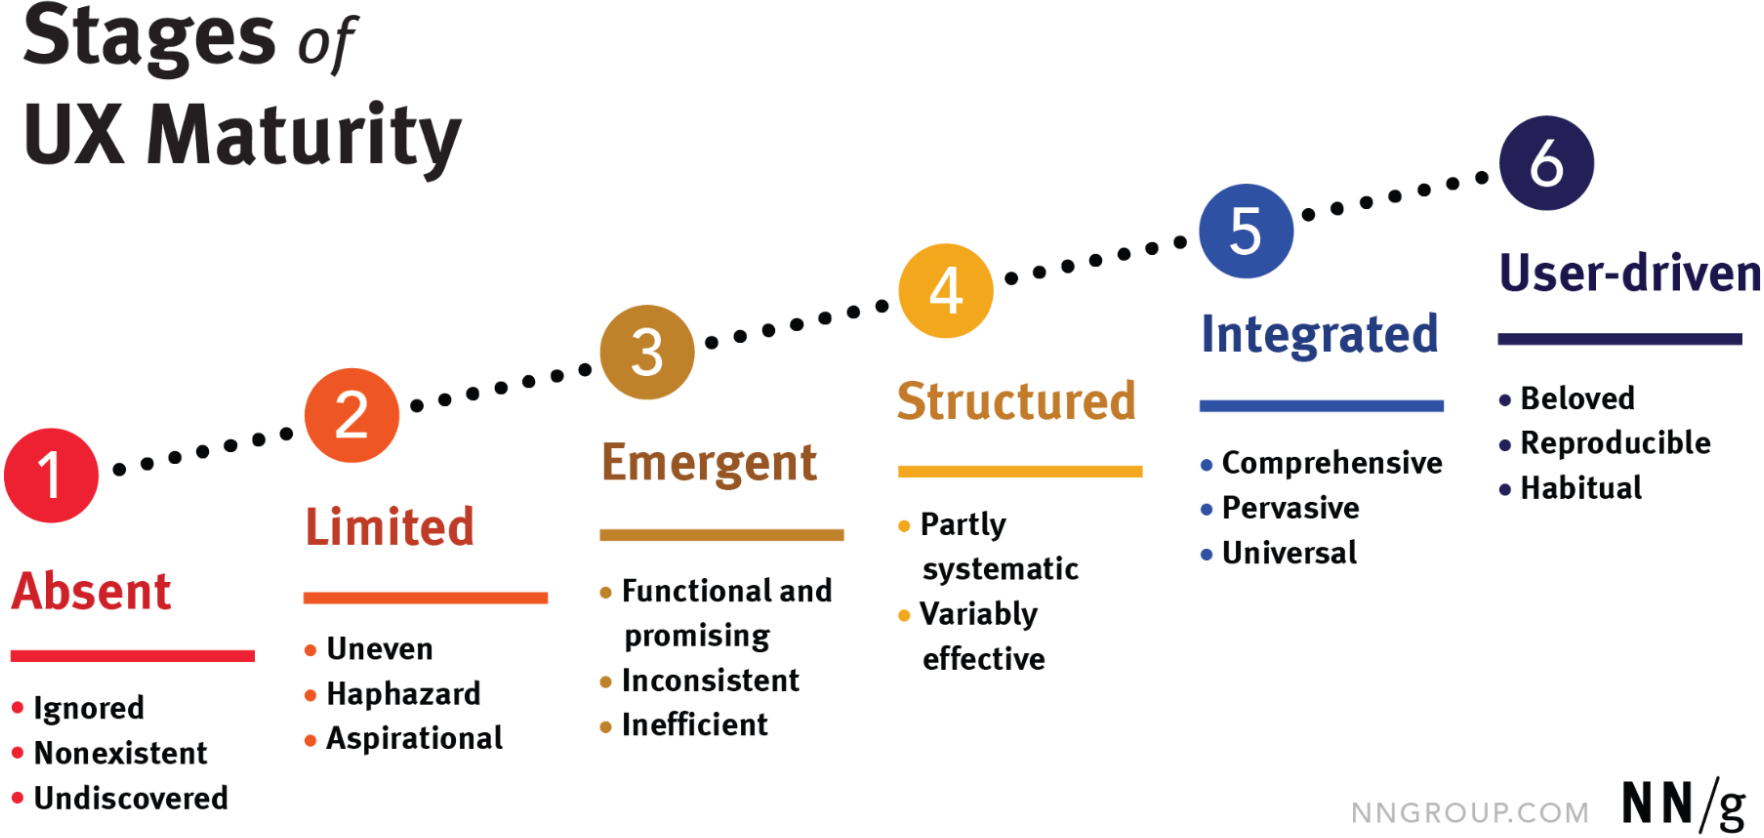 Visualization of UX maturity stages within an organization prepared by Nielsen Norman group. Provided in a simplified way. Slightly more detailed description can be found below the image.